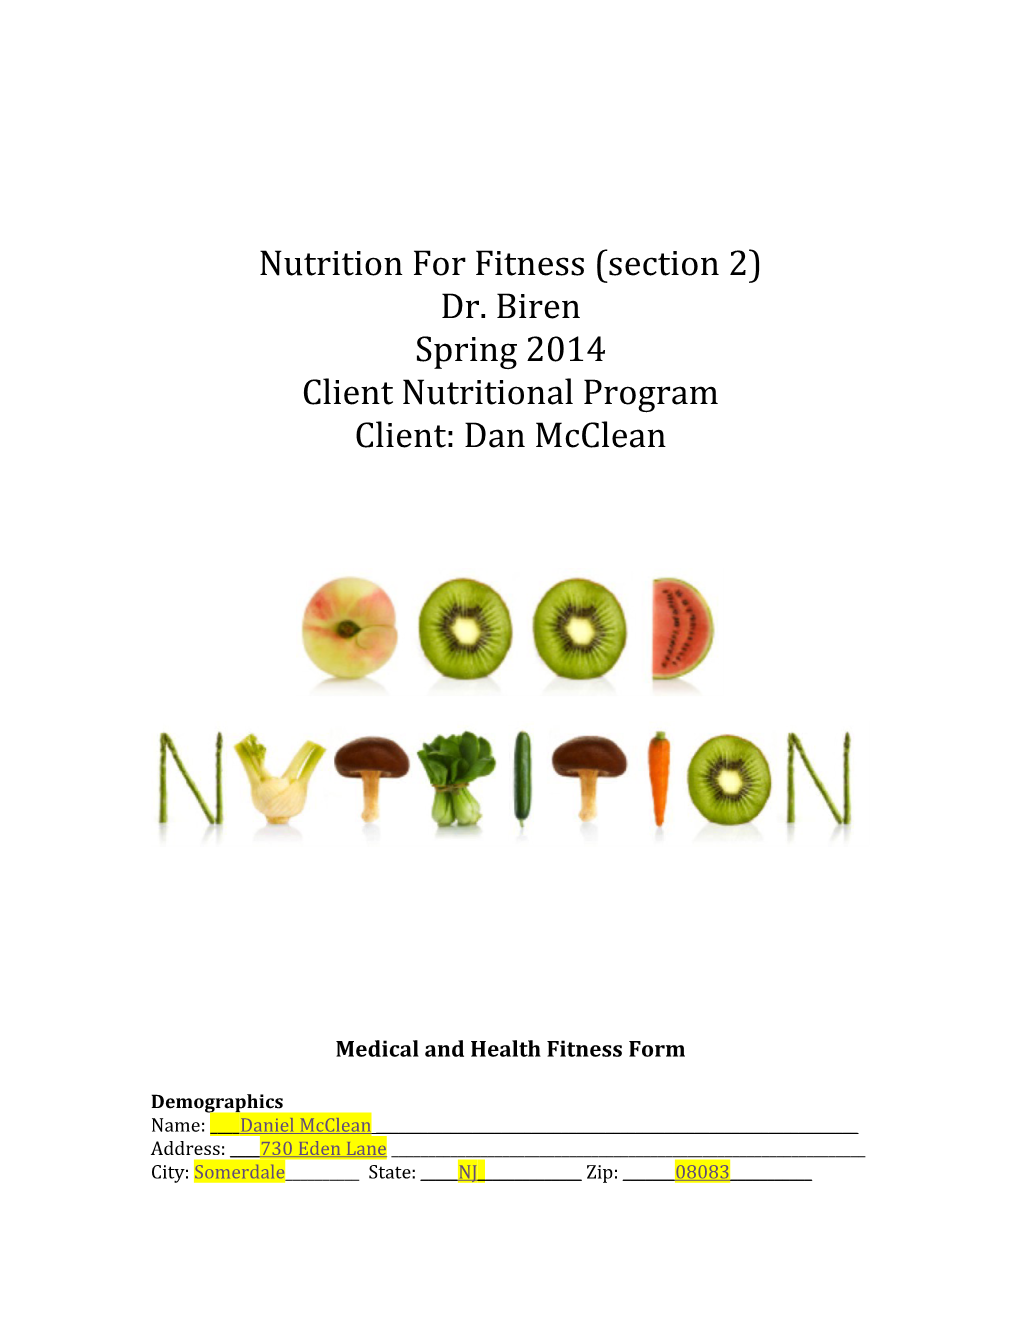 Nutrition for Fitness (Section 2)